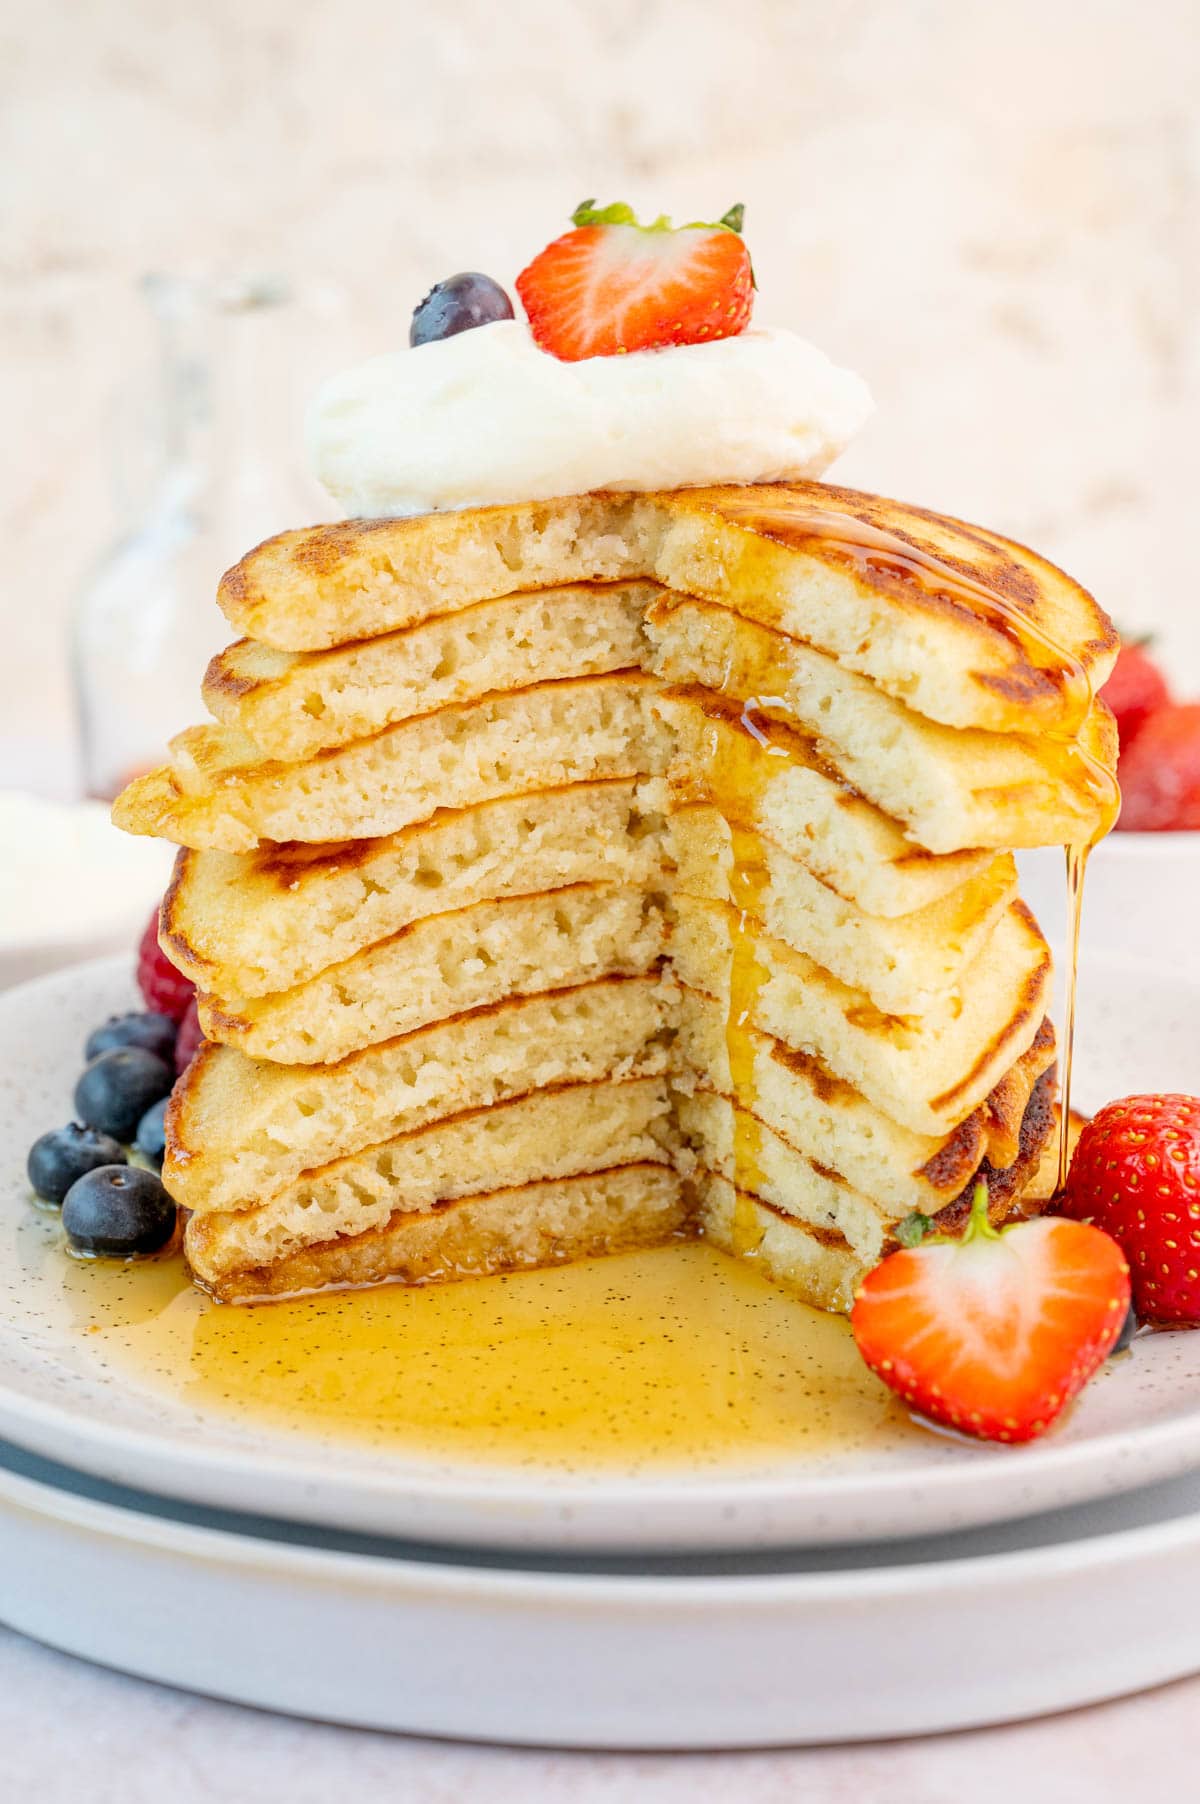 A stack of pancakes with a part missing on a white plate. Maple syrup is being poured over the pancakes. Berries on the side.